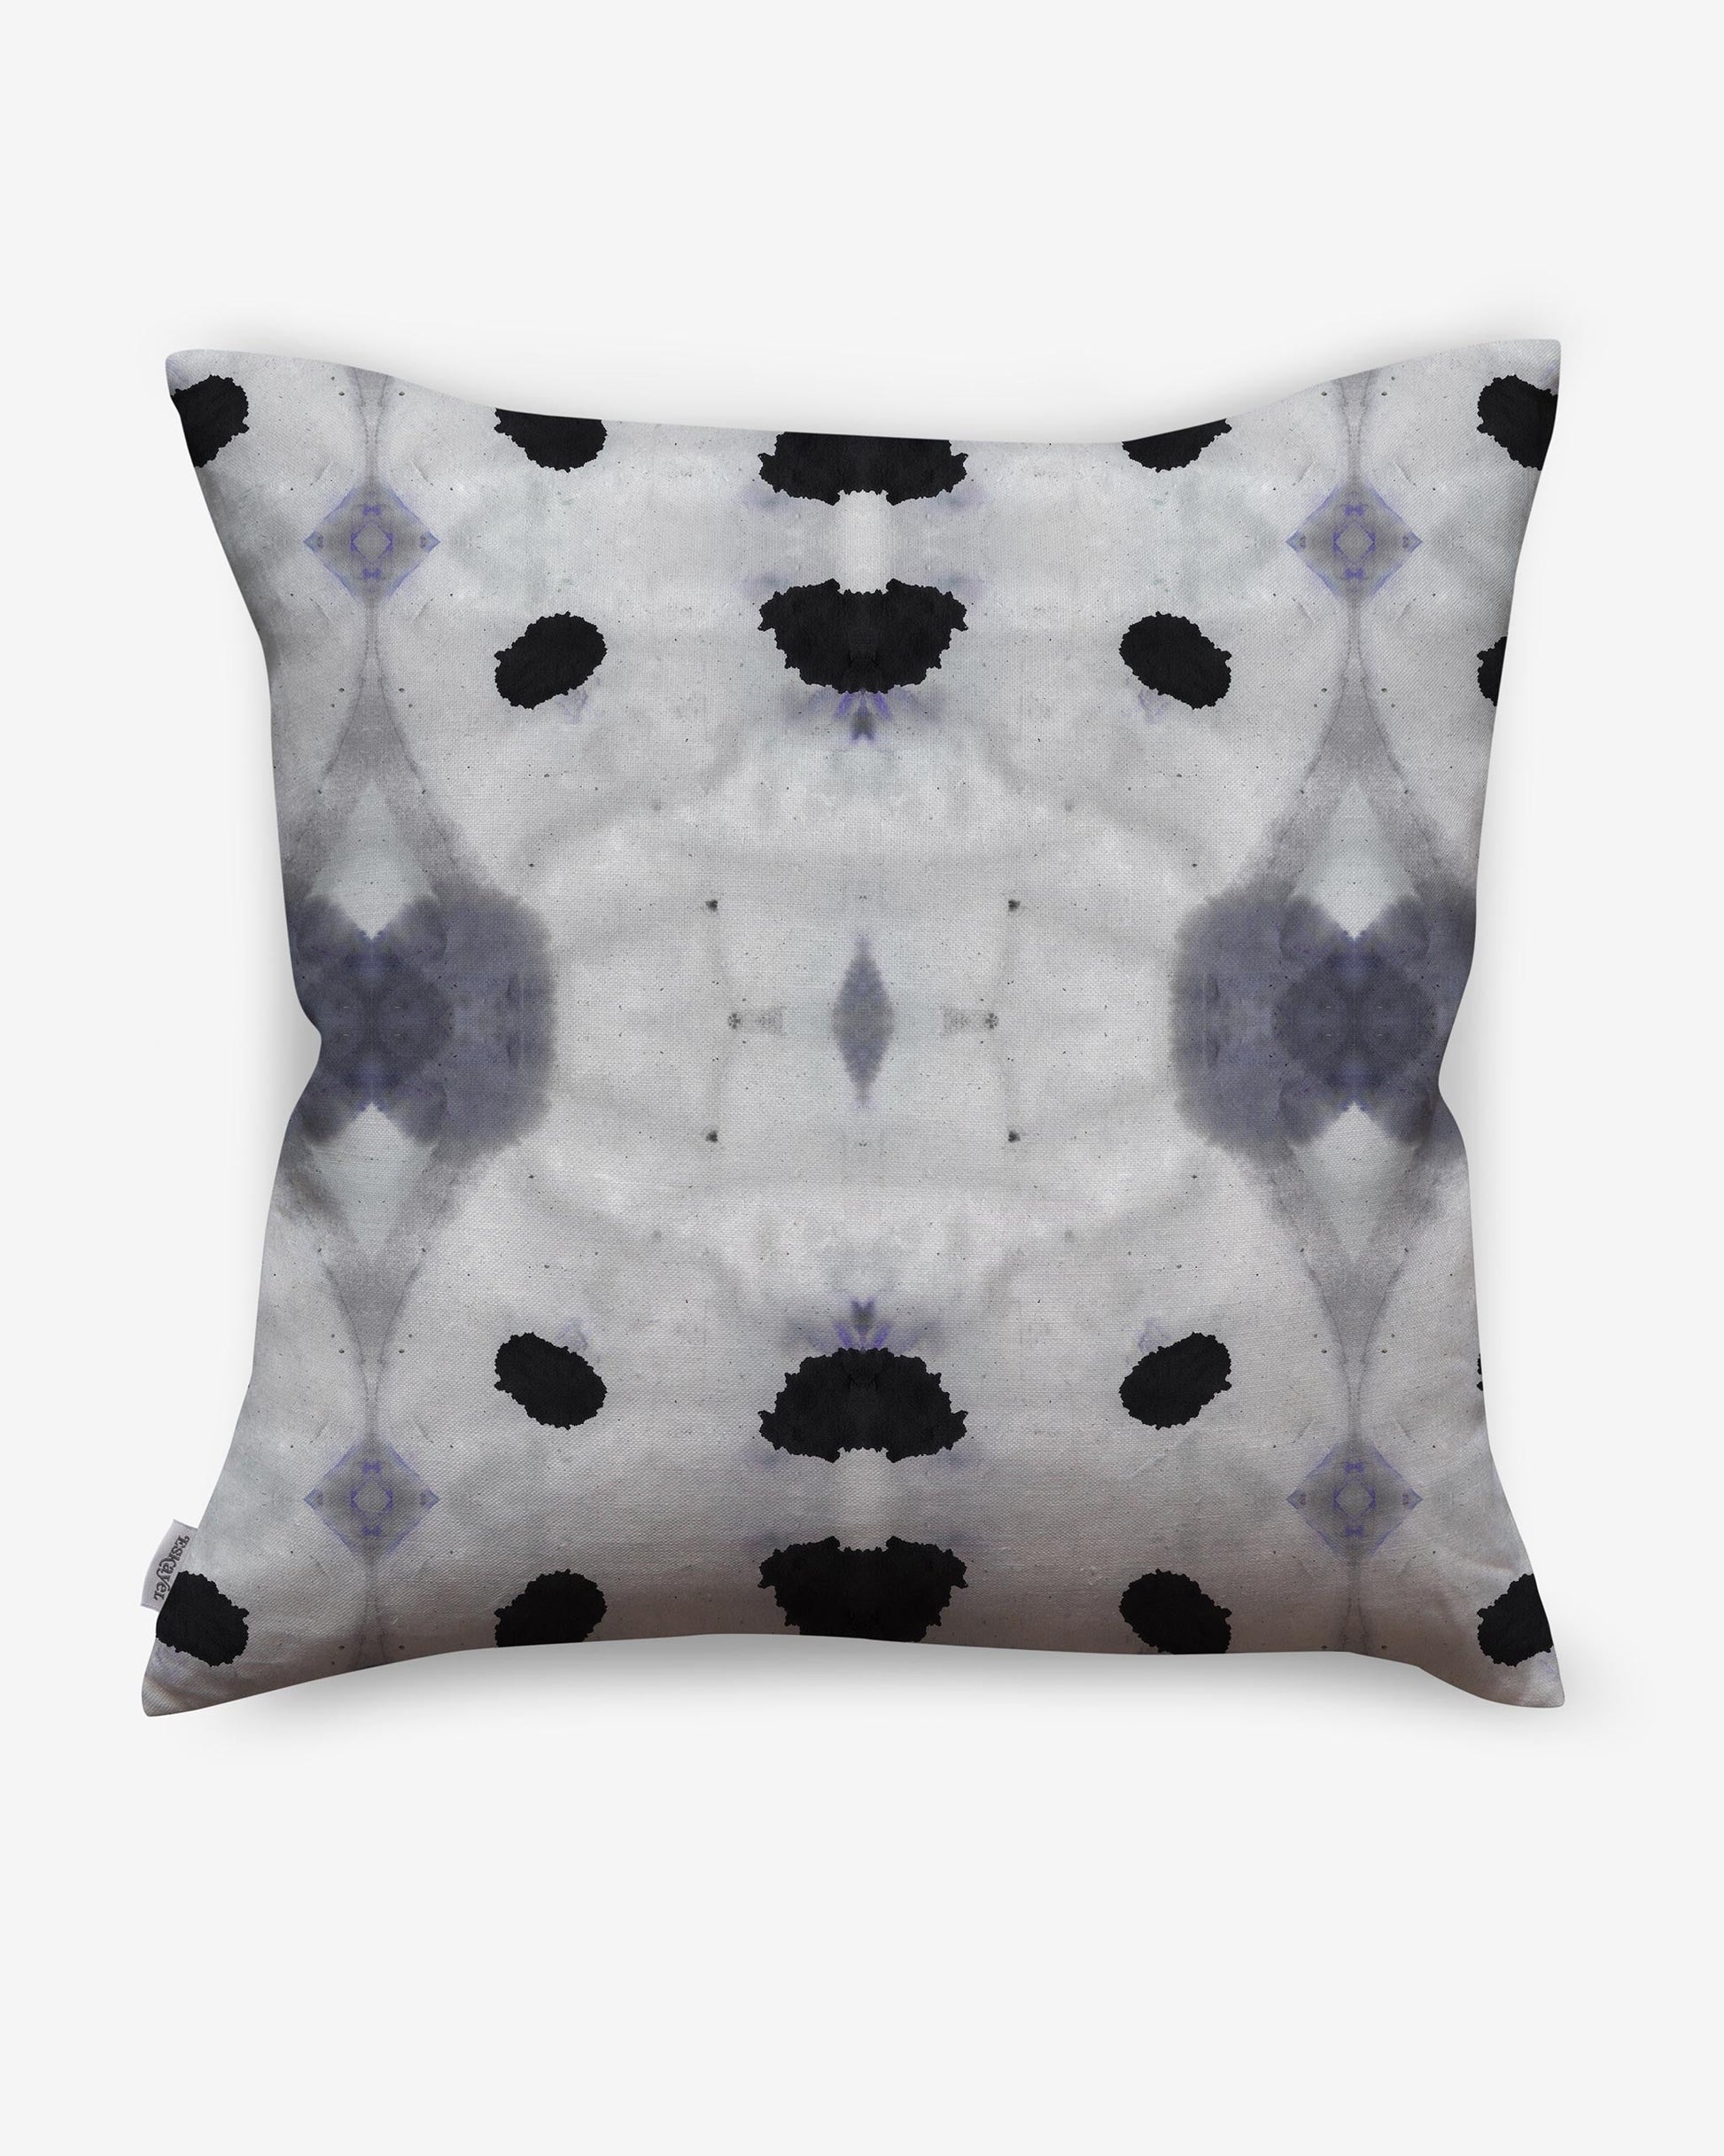 A Galileo Glass Pillow Indigo with abstract patterns of black and white dots on it